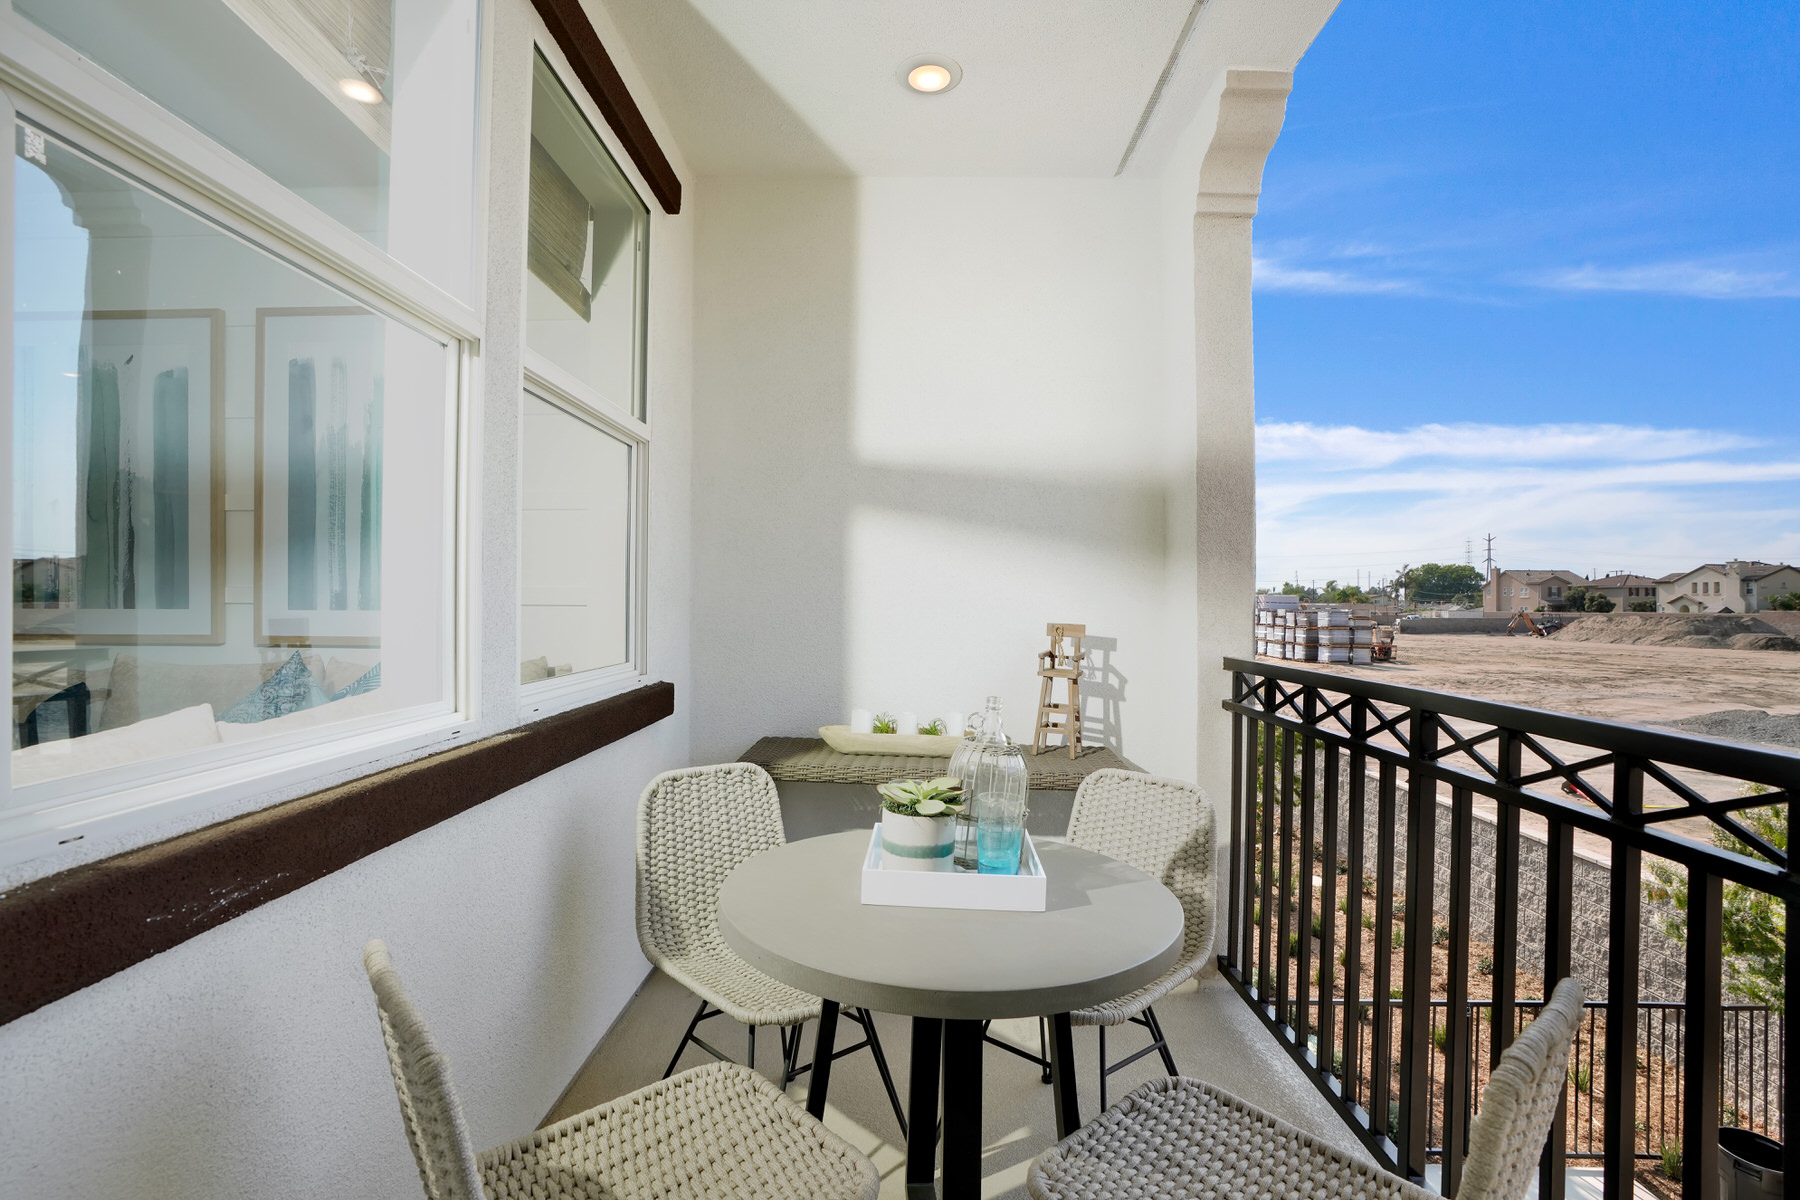 Balcony in Plan 2 at Townes at Magnolia by Melia Homes in Anaheim, CA